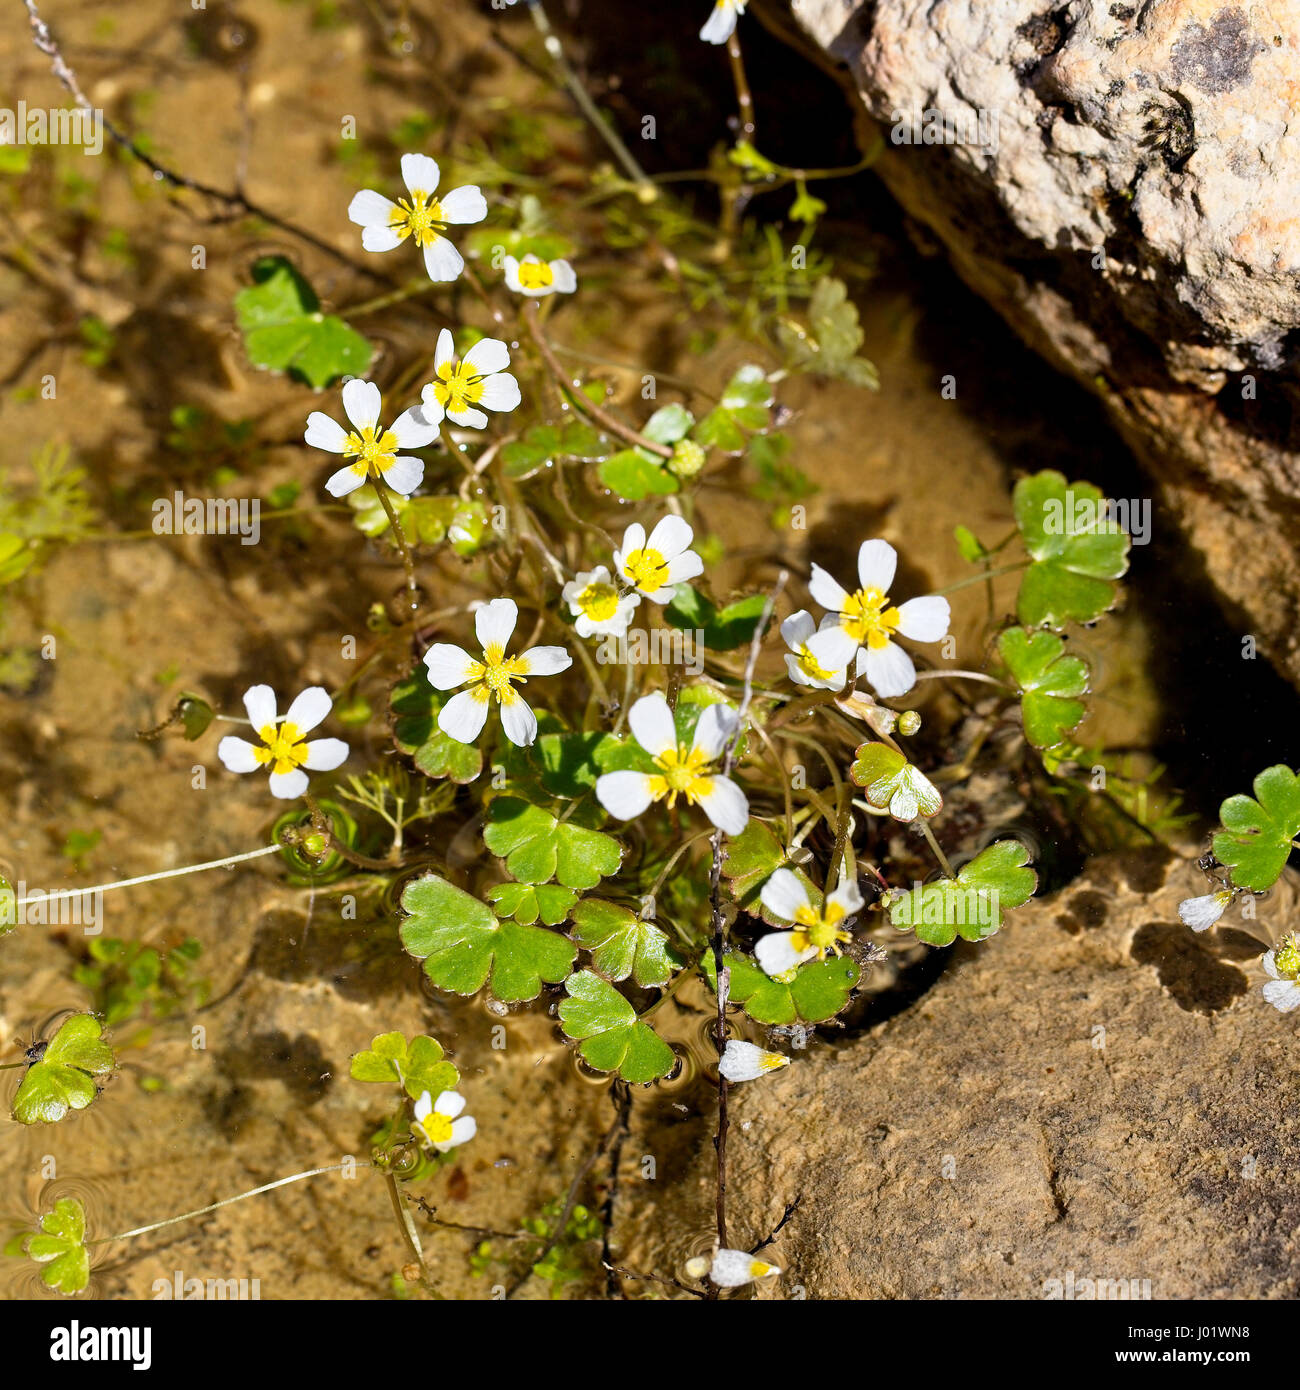 Pond Water-crowfoot (Ranunculus peltatus) in a small pond, Pegeia Forest, Paphos, Cyprus Stock Photo